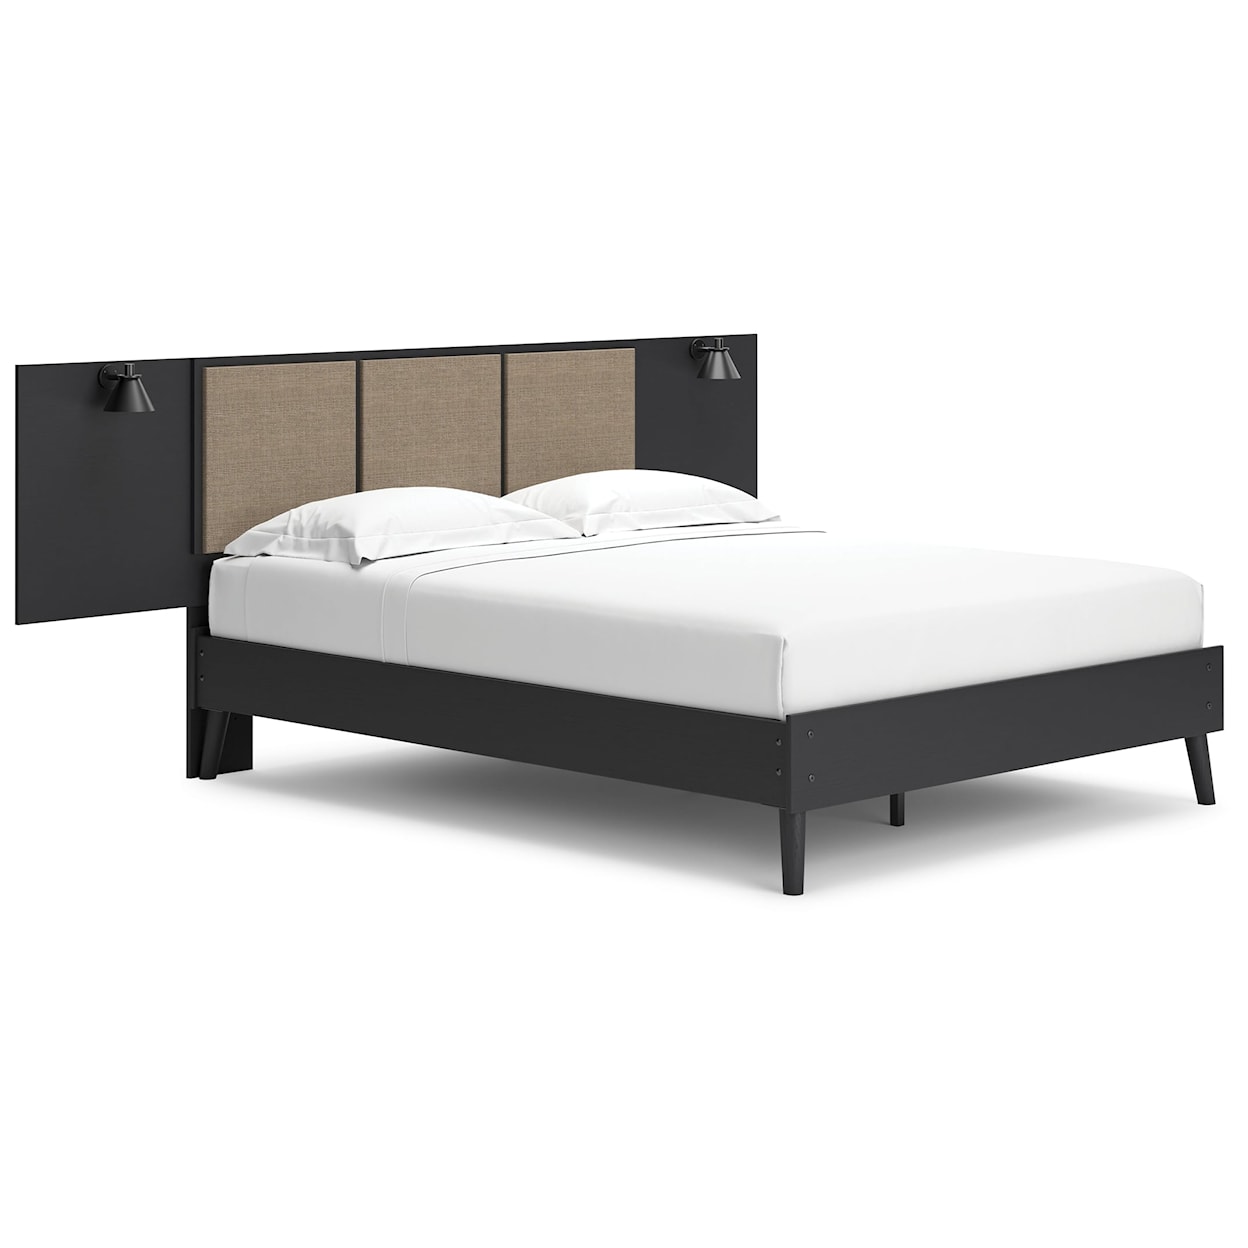 Ashley Furniture Signature Design Charlang Queen Panel Platform Bed with 2 Extensions